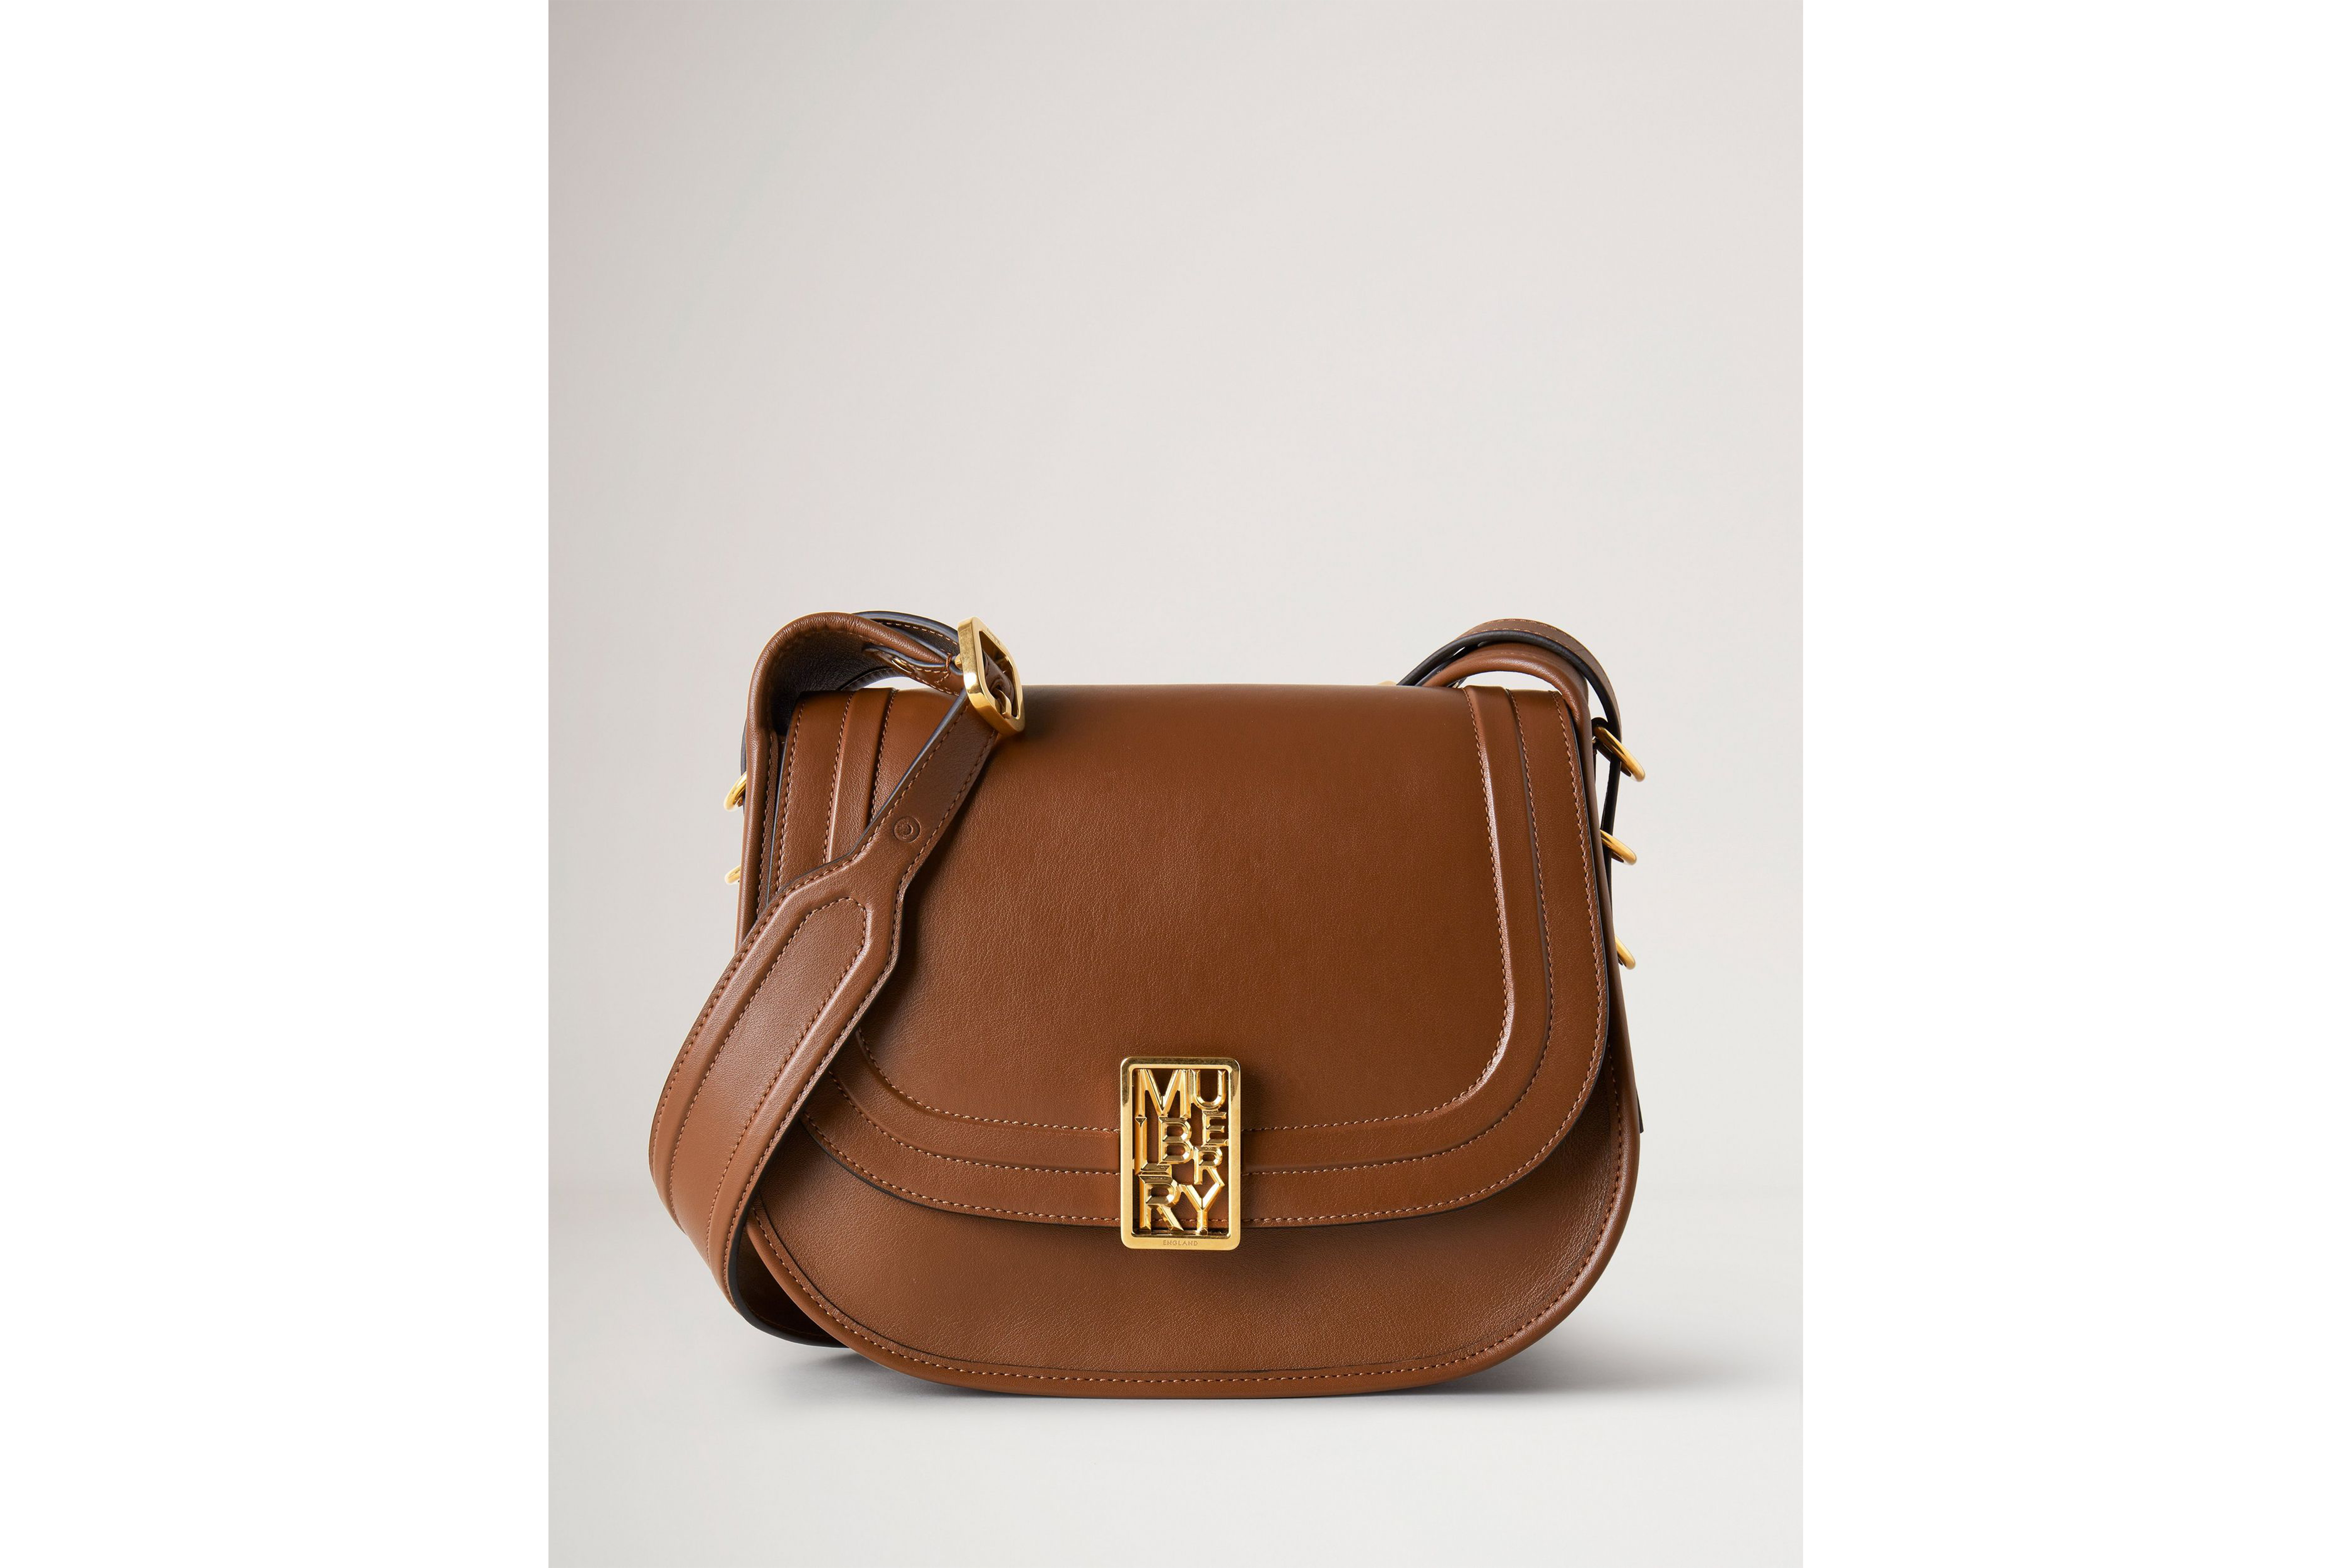 Take-a-look-at-Mulberry-new-Sadie-Satchel-03